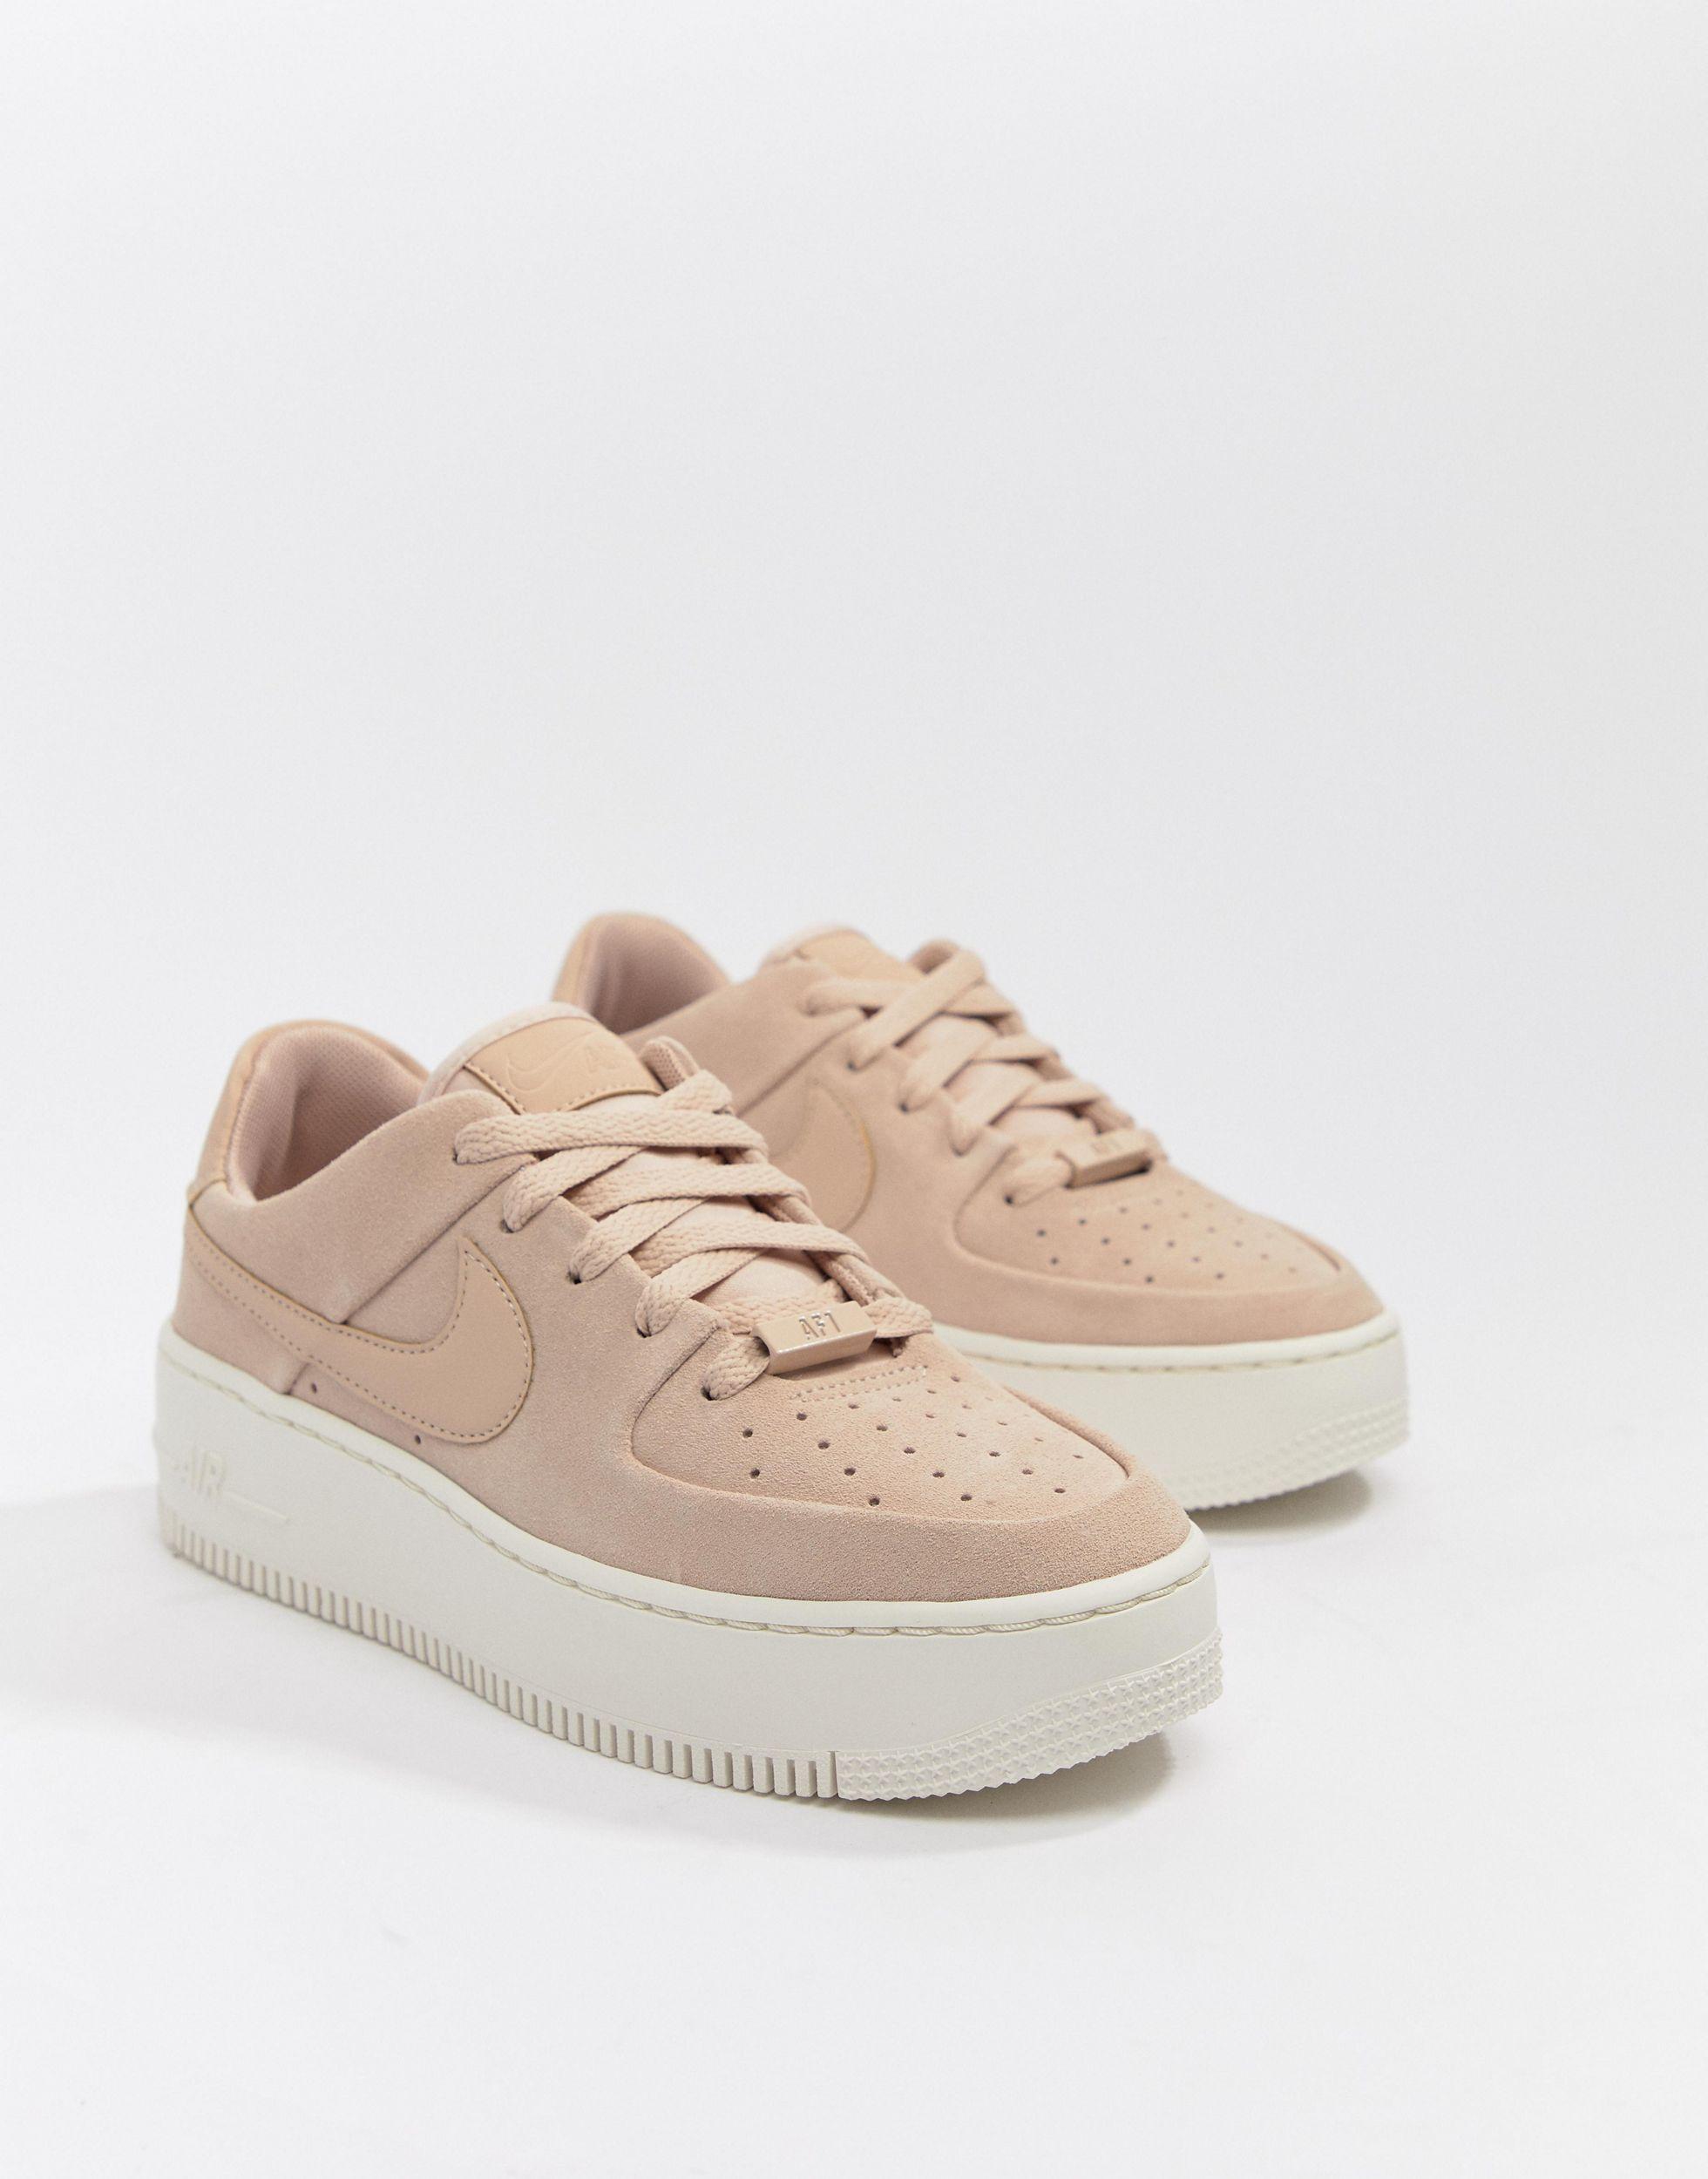 Nike Leather Air Force 1 Pixel Shoe in Pink (Natural) - Save 37% | Lyst